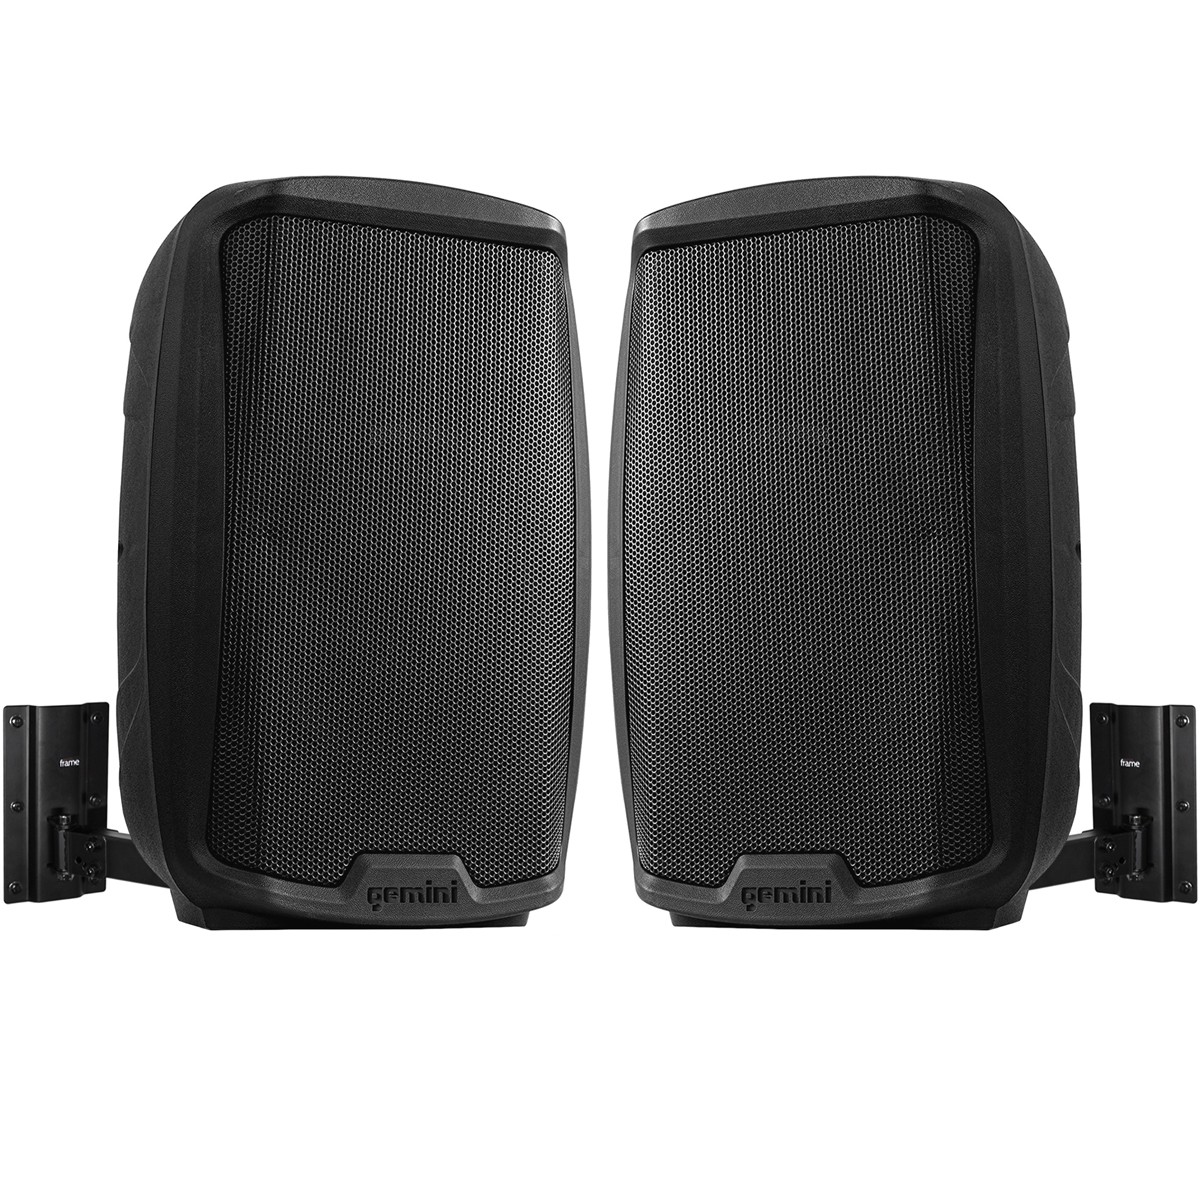 Fitness Sound System with 2 Gemini Bluetooth Speakers